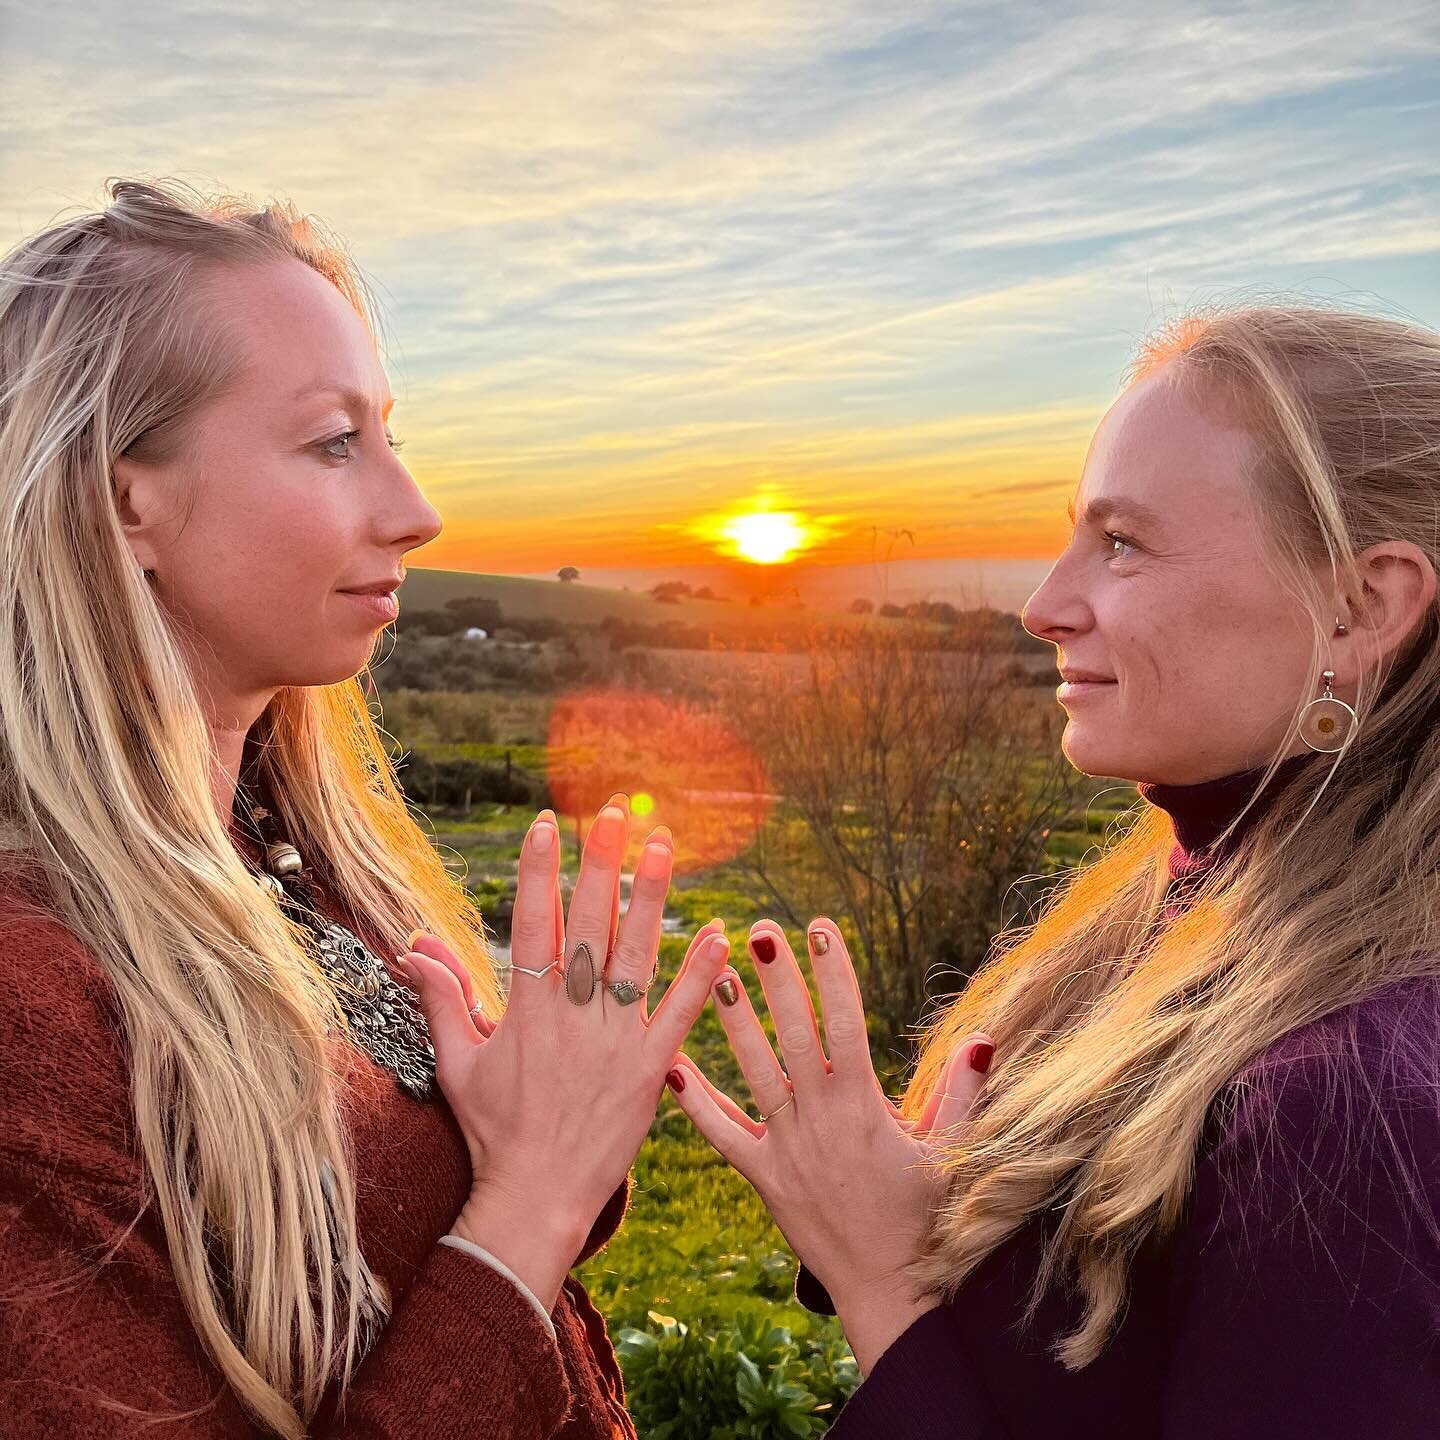 Friends, let's get ready for the ultimate EASTER holiday🌞🌷🧘&zwj;♂️ Join us for 5 nights in Andalusia for our 𝕍𝕚𝕓𝕣𝕒𝕟𝕥 𝕊𝕡𝕚𝕣𝕚𝕥 Retreat @suryalilayoga 

@malva.yoga &amp; me have created a rejuvenating program with Yoga, breathwork, medit